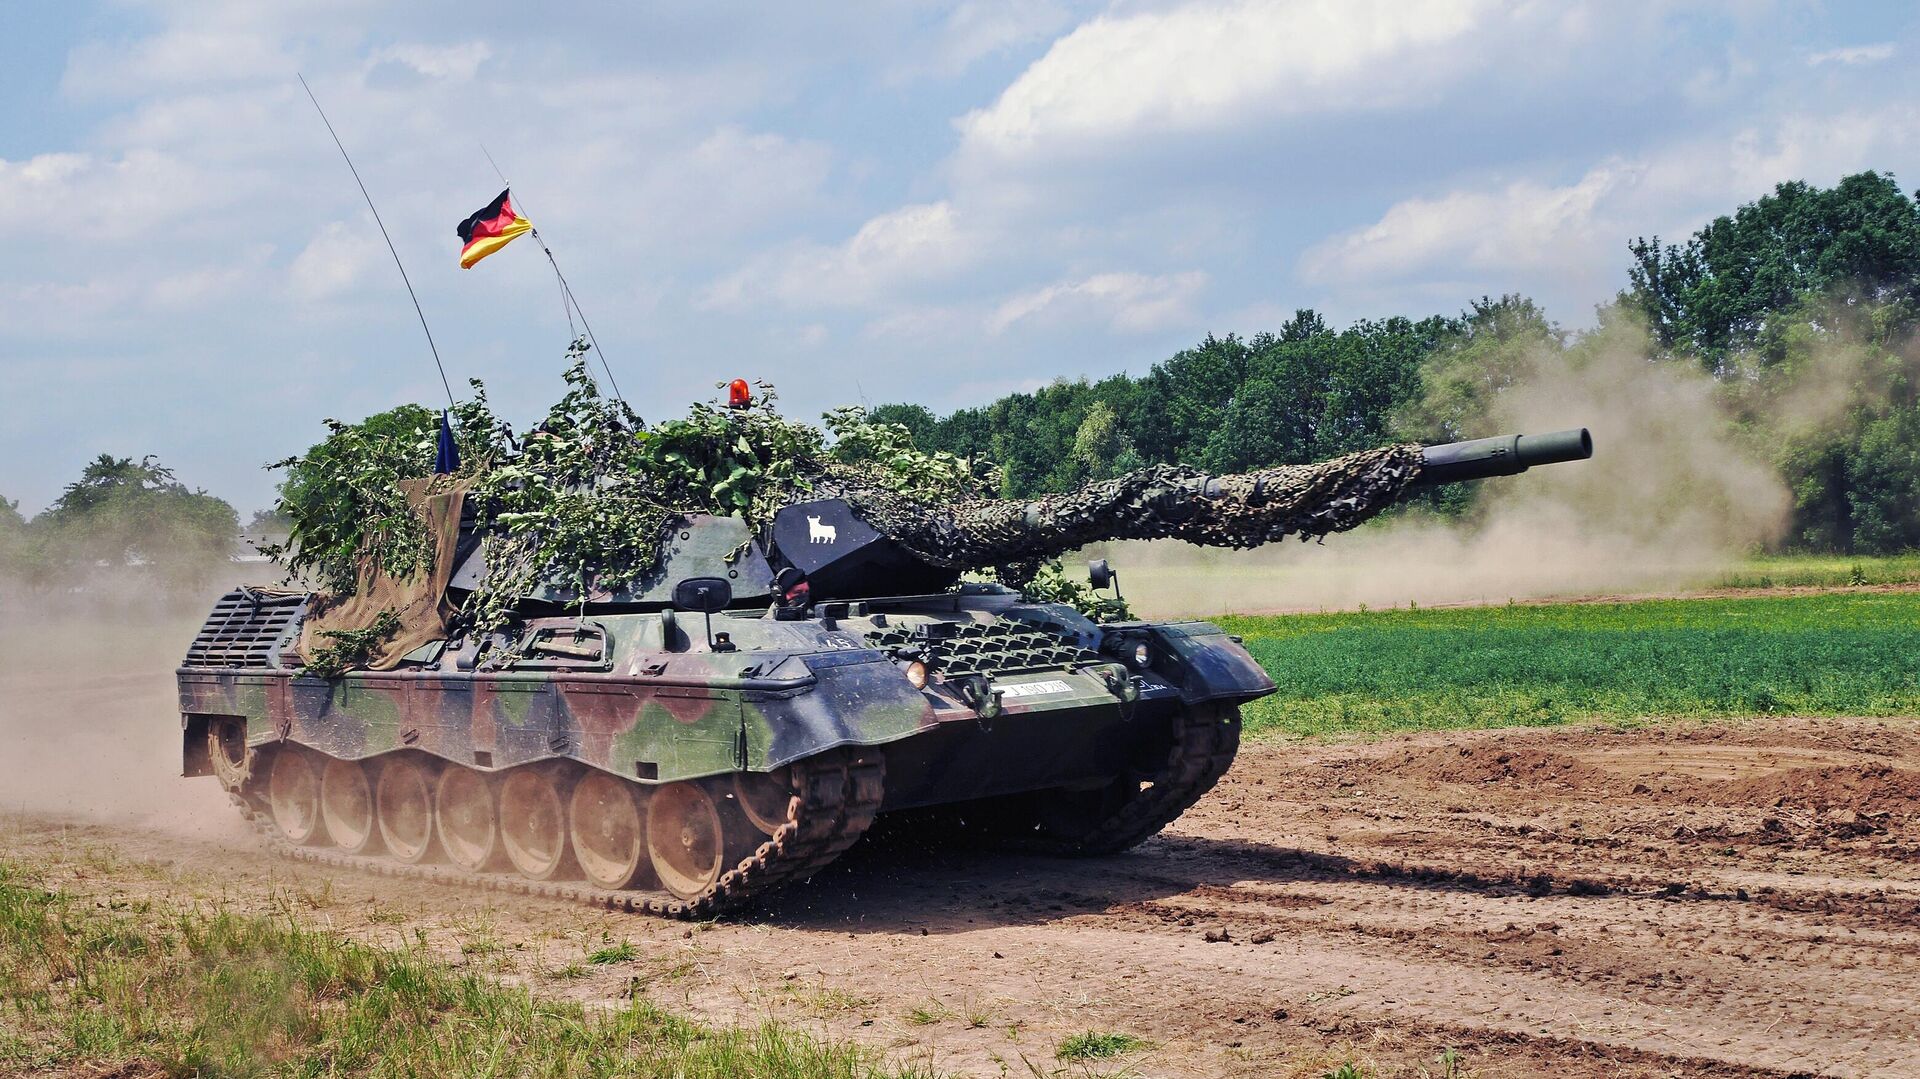 A German Leopard 1A5 tank drives past at the at the 2015 military day in Uffenheim, Germany - Sputnik International, 1920, 27.03.2023